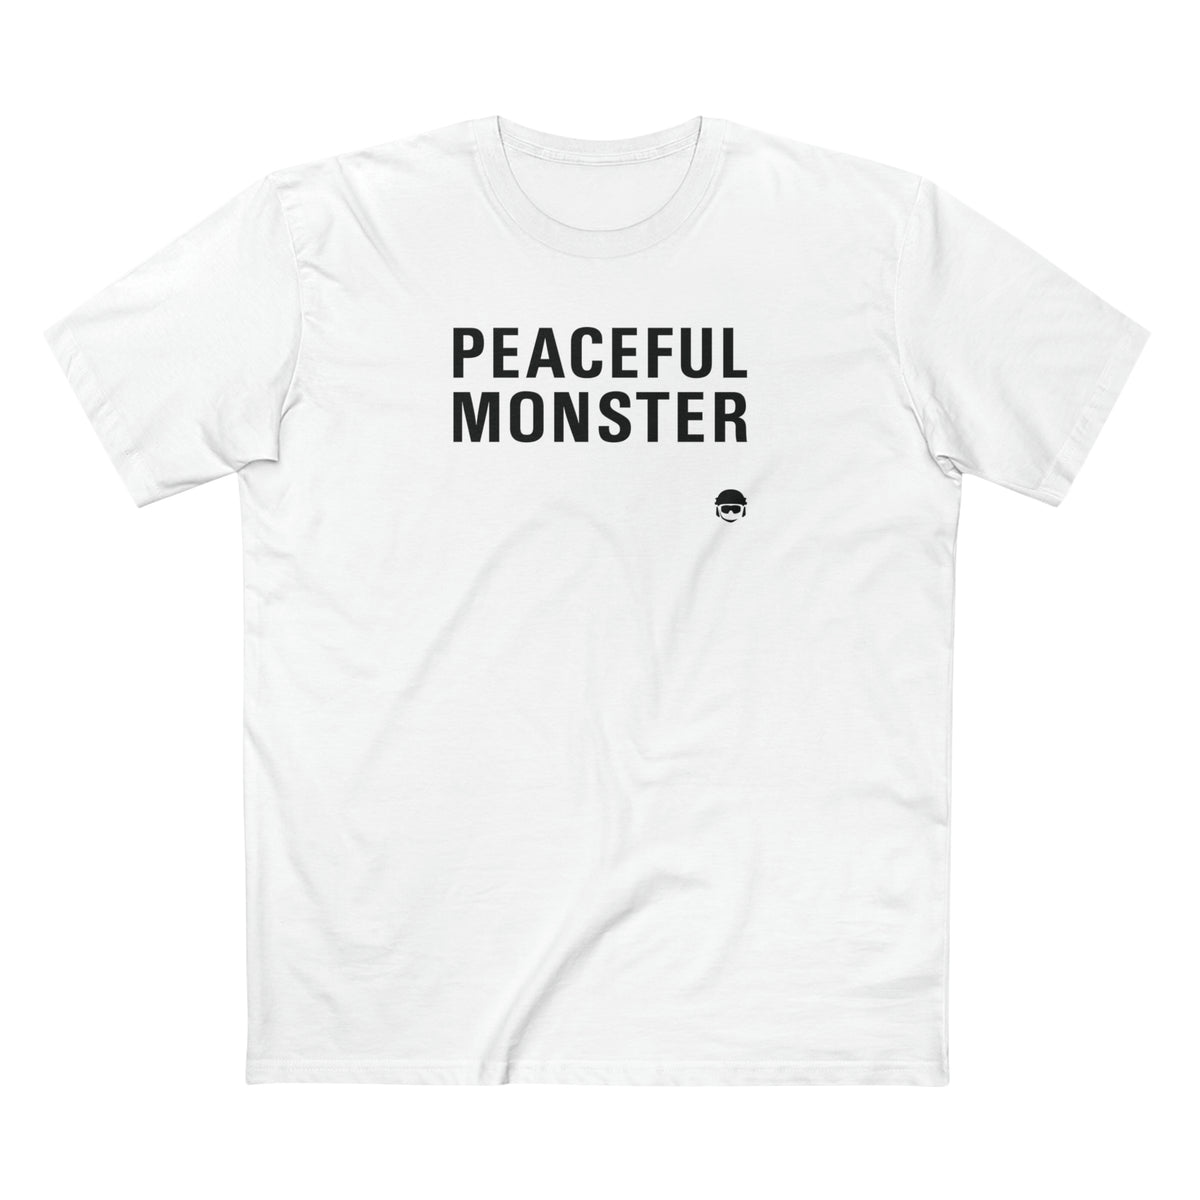 PEACEFUL MONSTER 2 - Cotton Tee